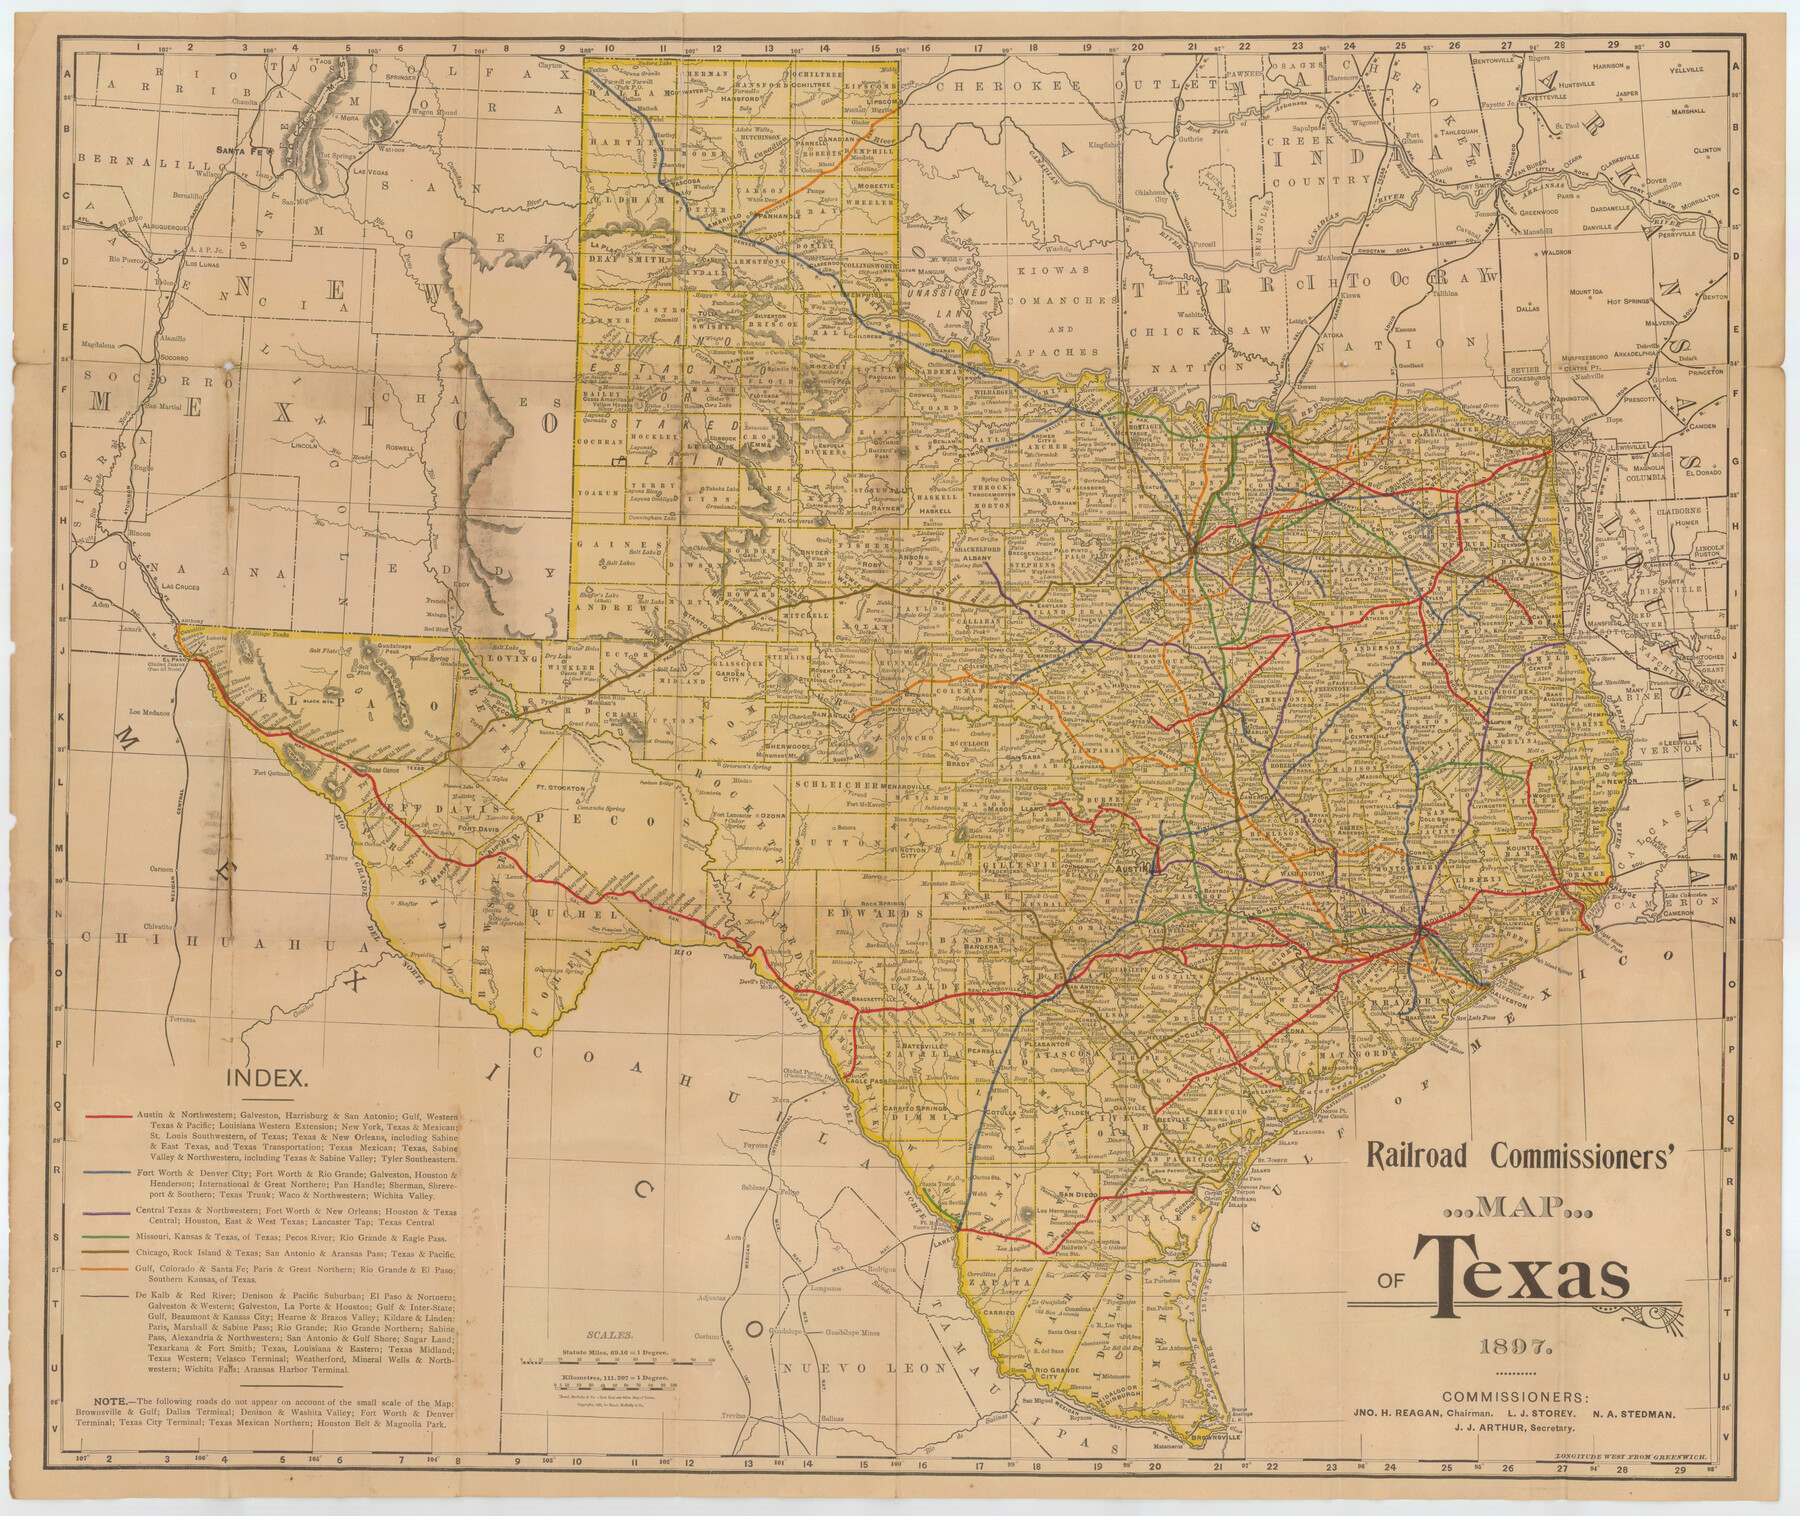 90070, Railroad Commissioner's Map of Texas, Non-GLO Digital Images